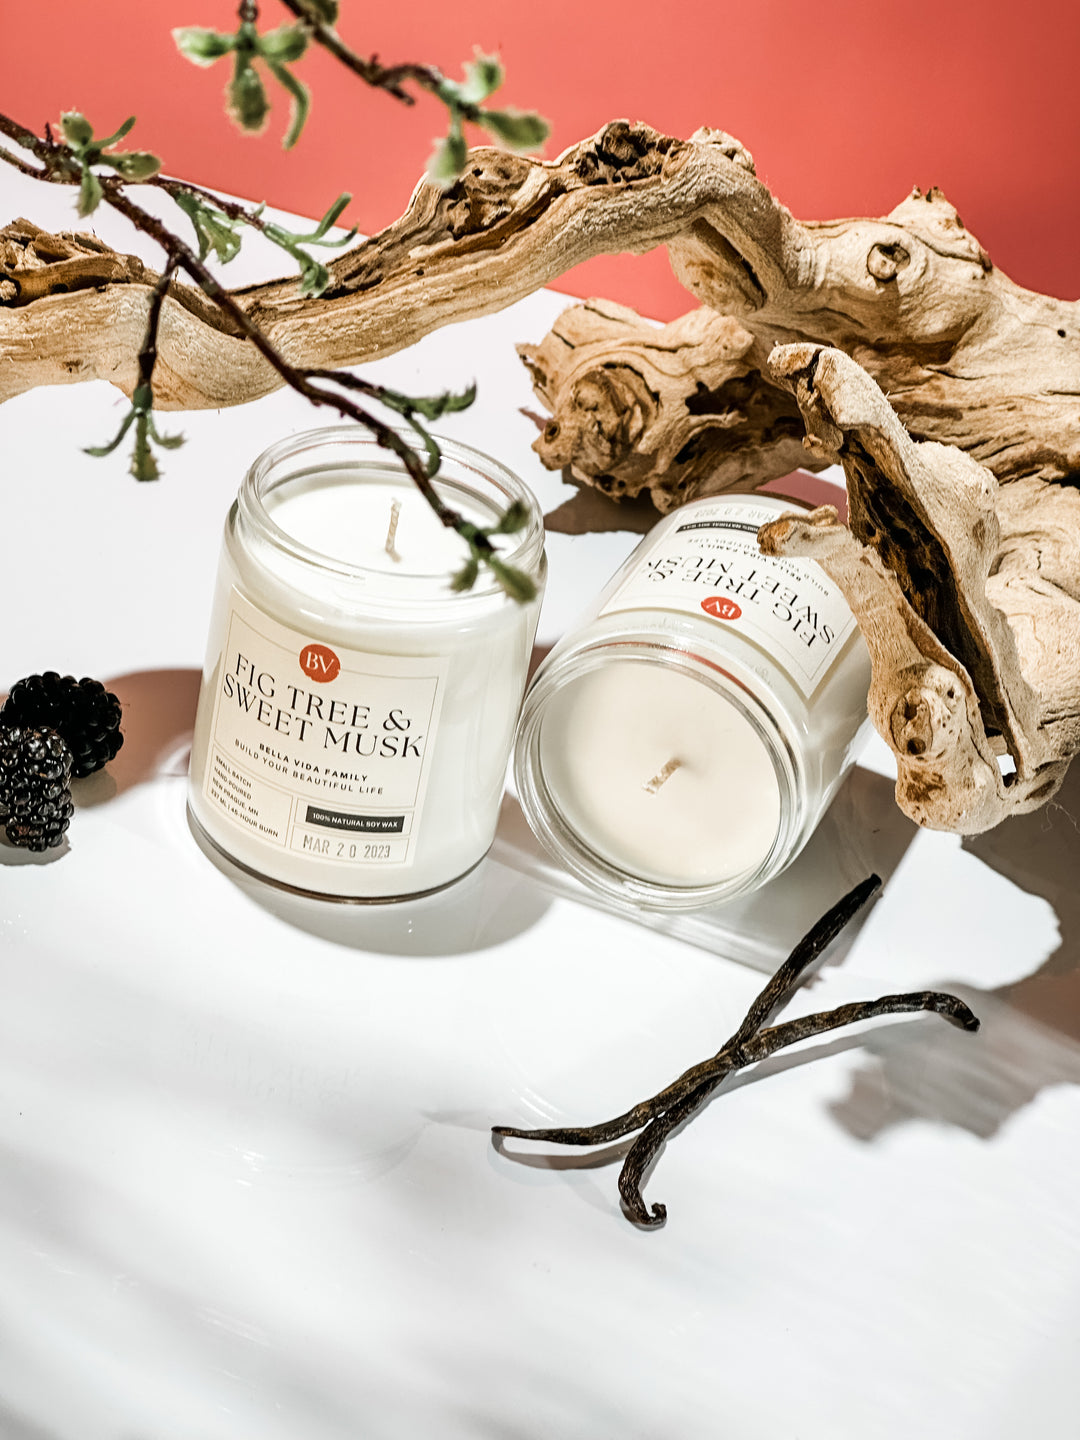 Fig Tree & Sweet Musk Soy Candle